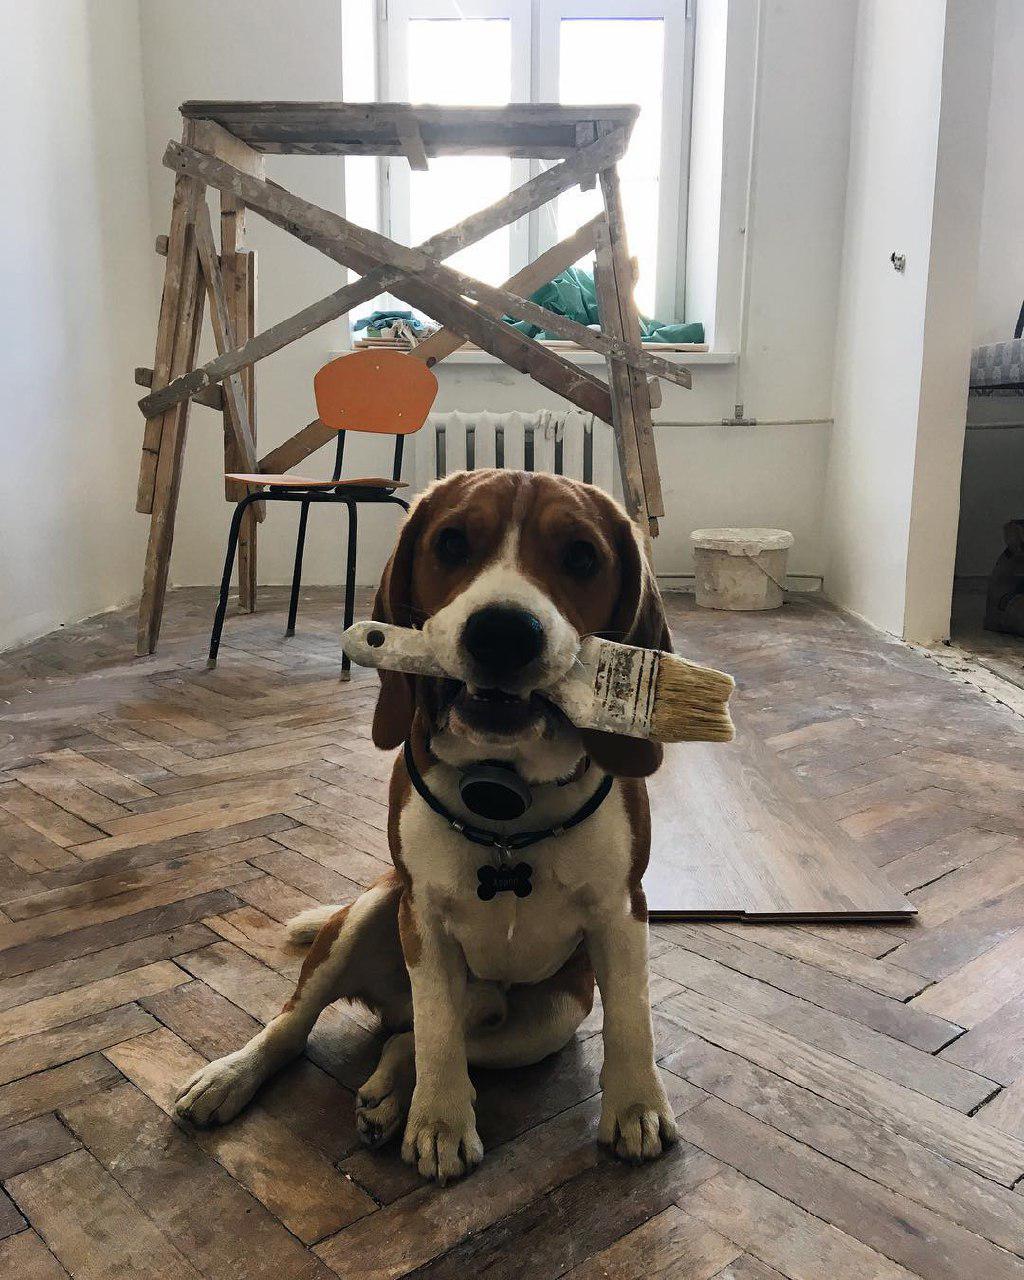 Beagle sitting on the floor with a paint brush in its mouth